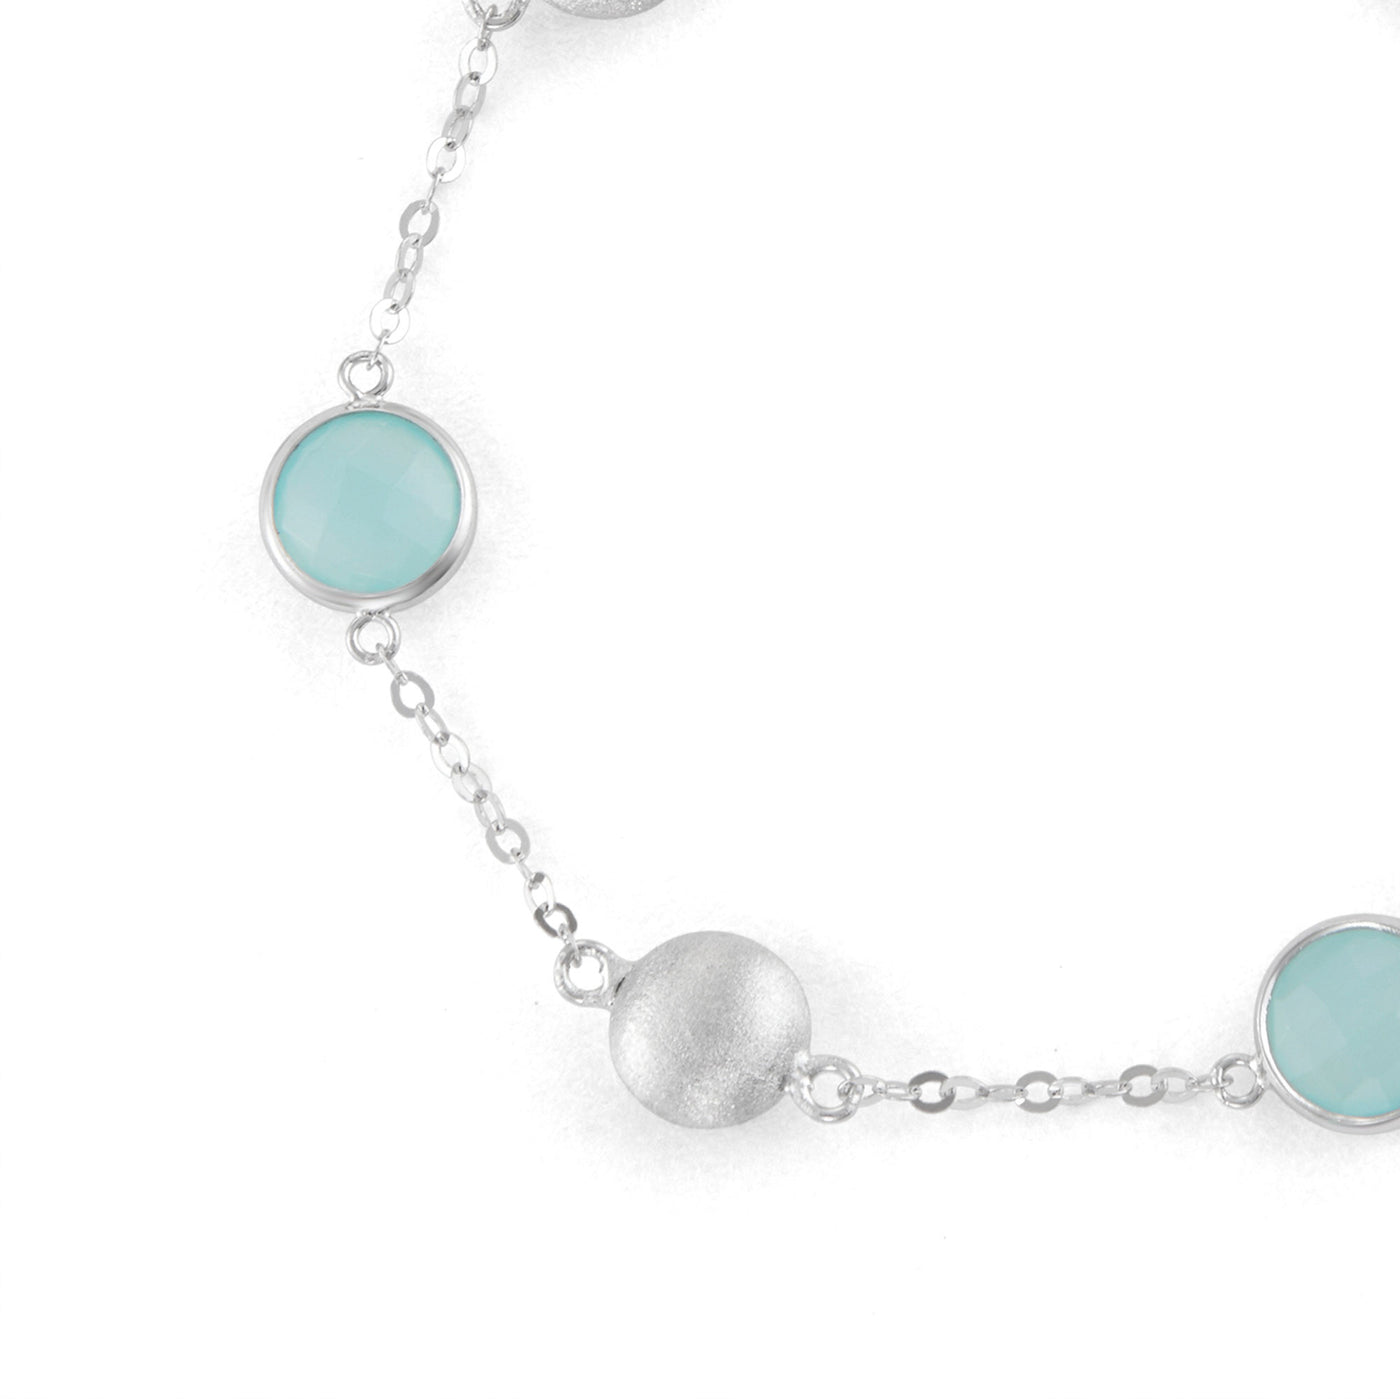 Sterling Silver Bead And Bezel Bracelet With Aqua Chalcedony Round Gemstones